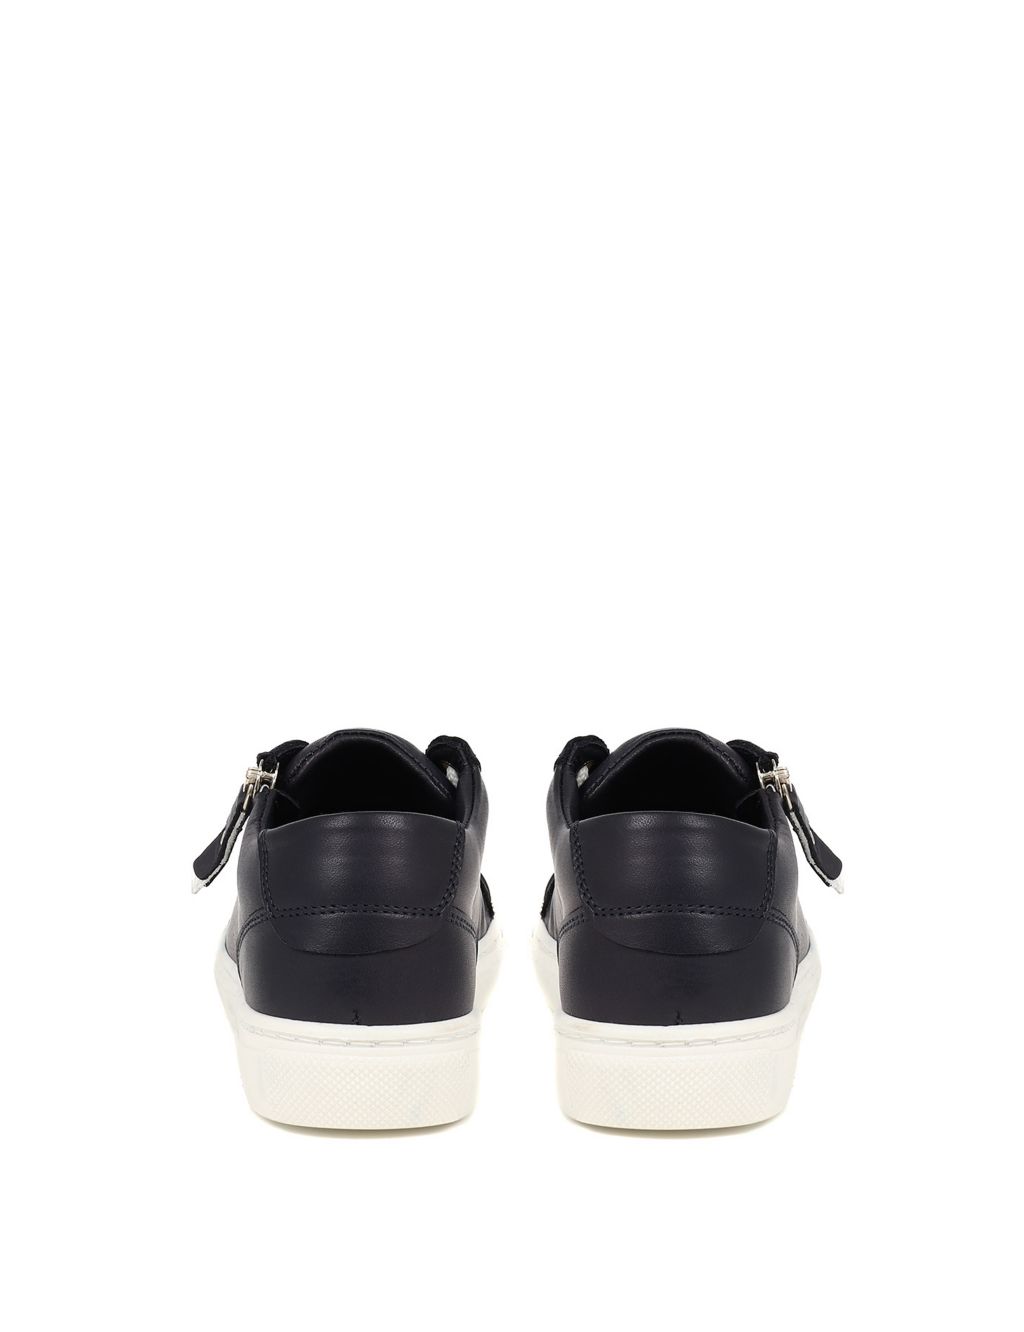 Leather Zip Up Trainers image 5